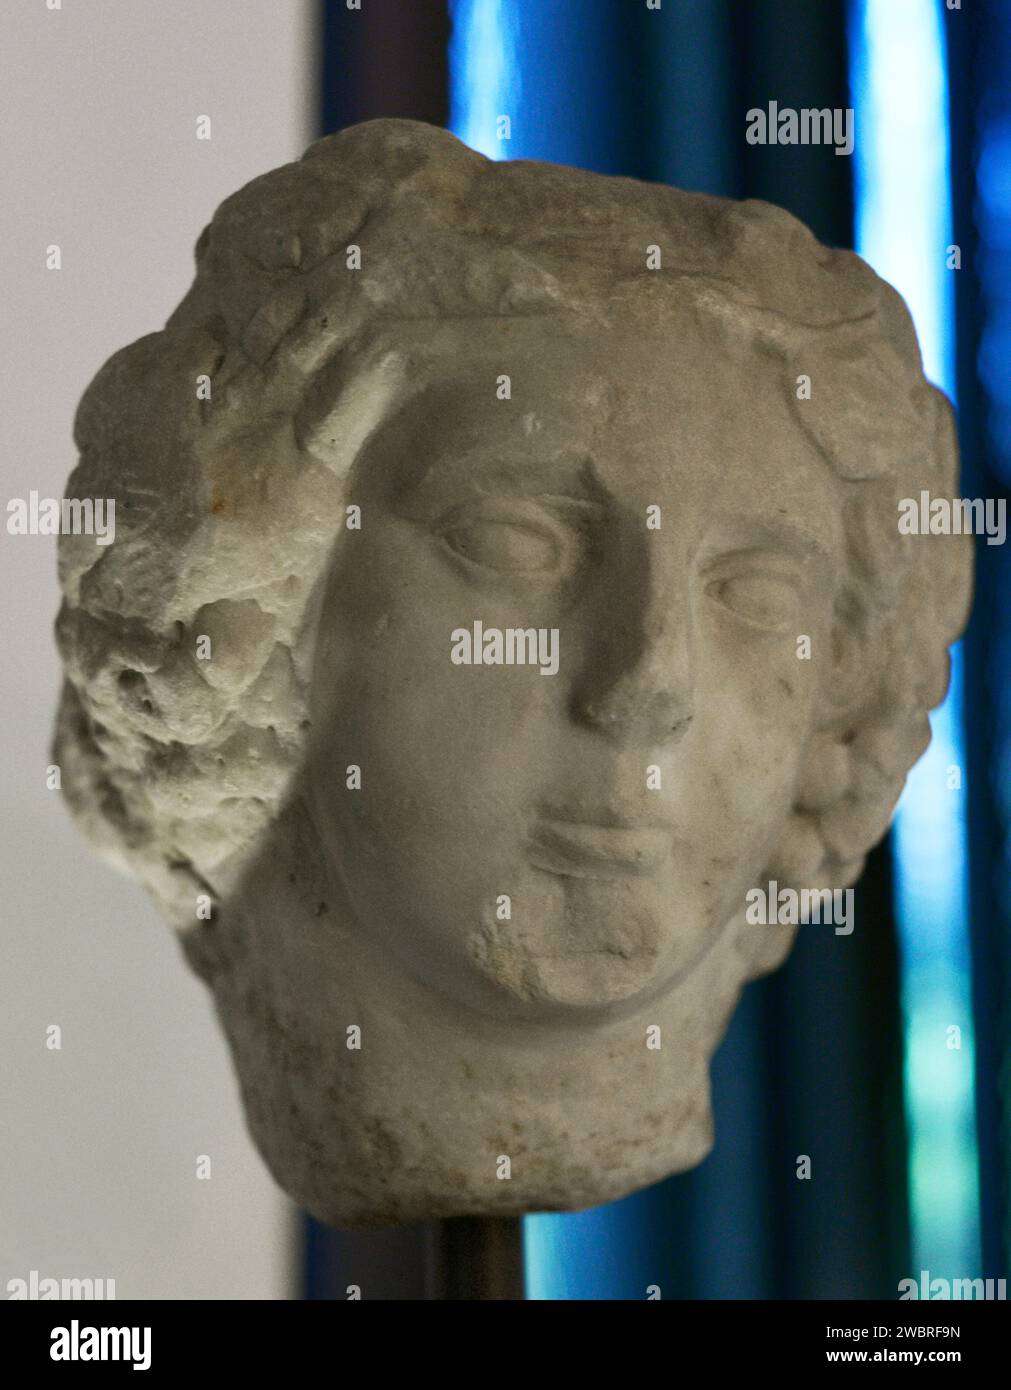 Dionysus (Bacchus). God of wine. Head of Dionysus. 1st and 2nd centuries AD. From Mértola, Beja district, Portugal. National Archaeology Museum. Lisbon, Portugal. Stock Photo